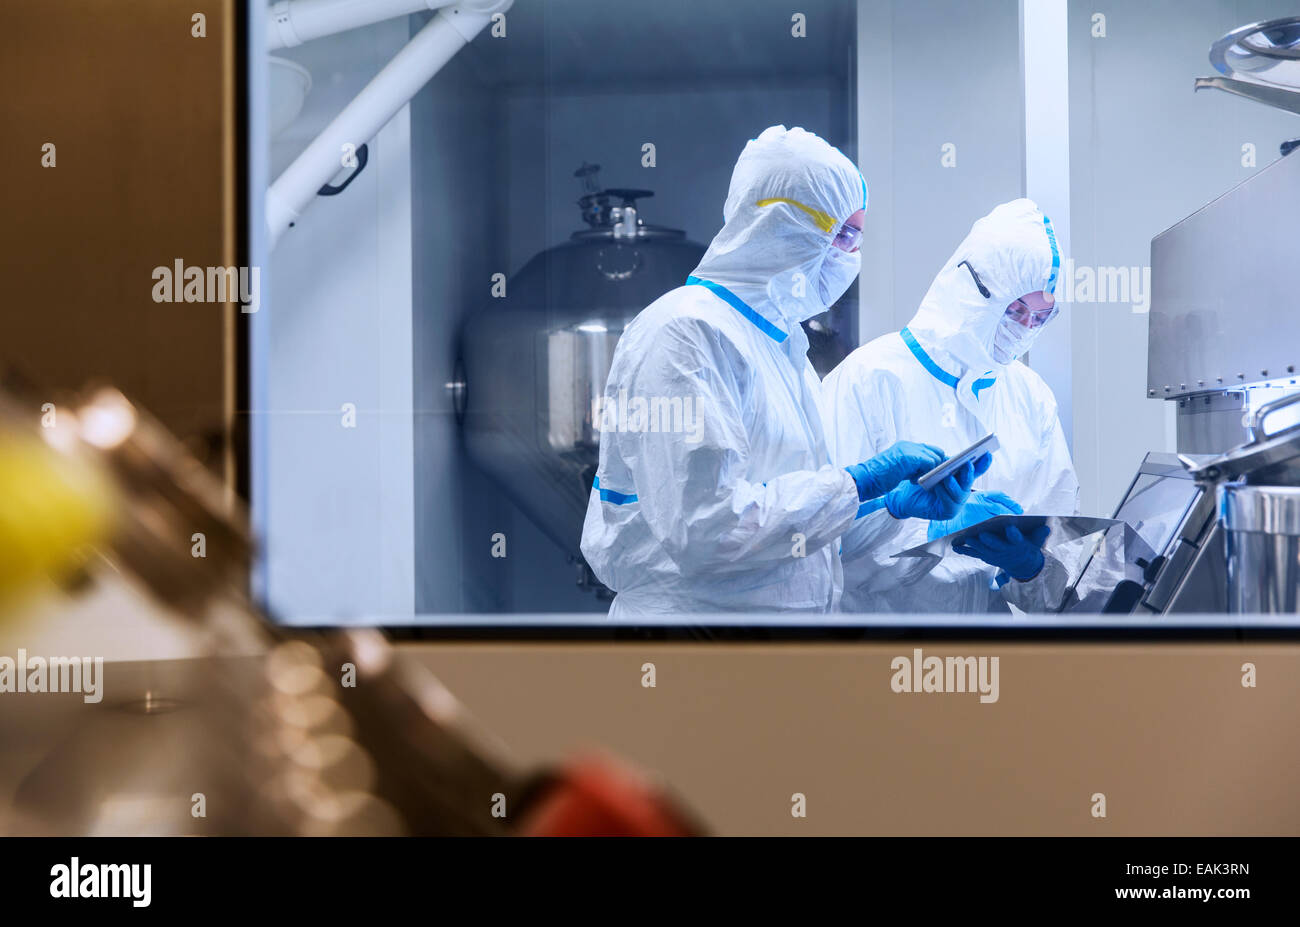 Scientists in clean suits using digital tablets in experiment in laboratory Stock Photo